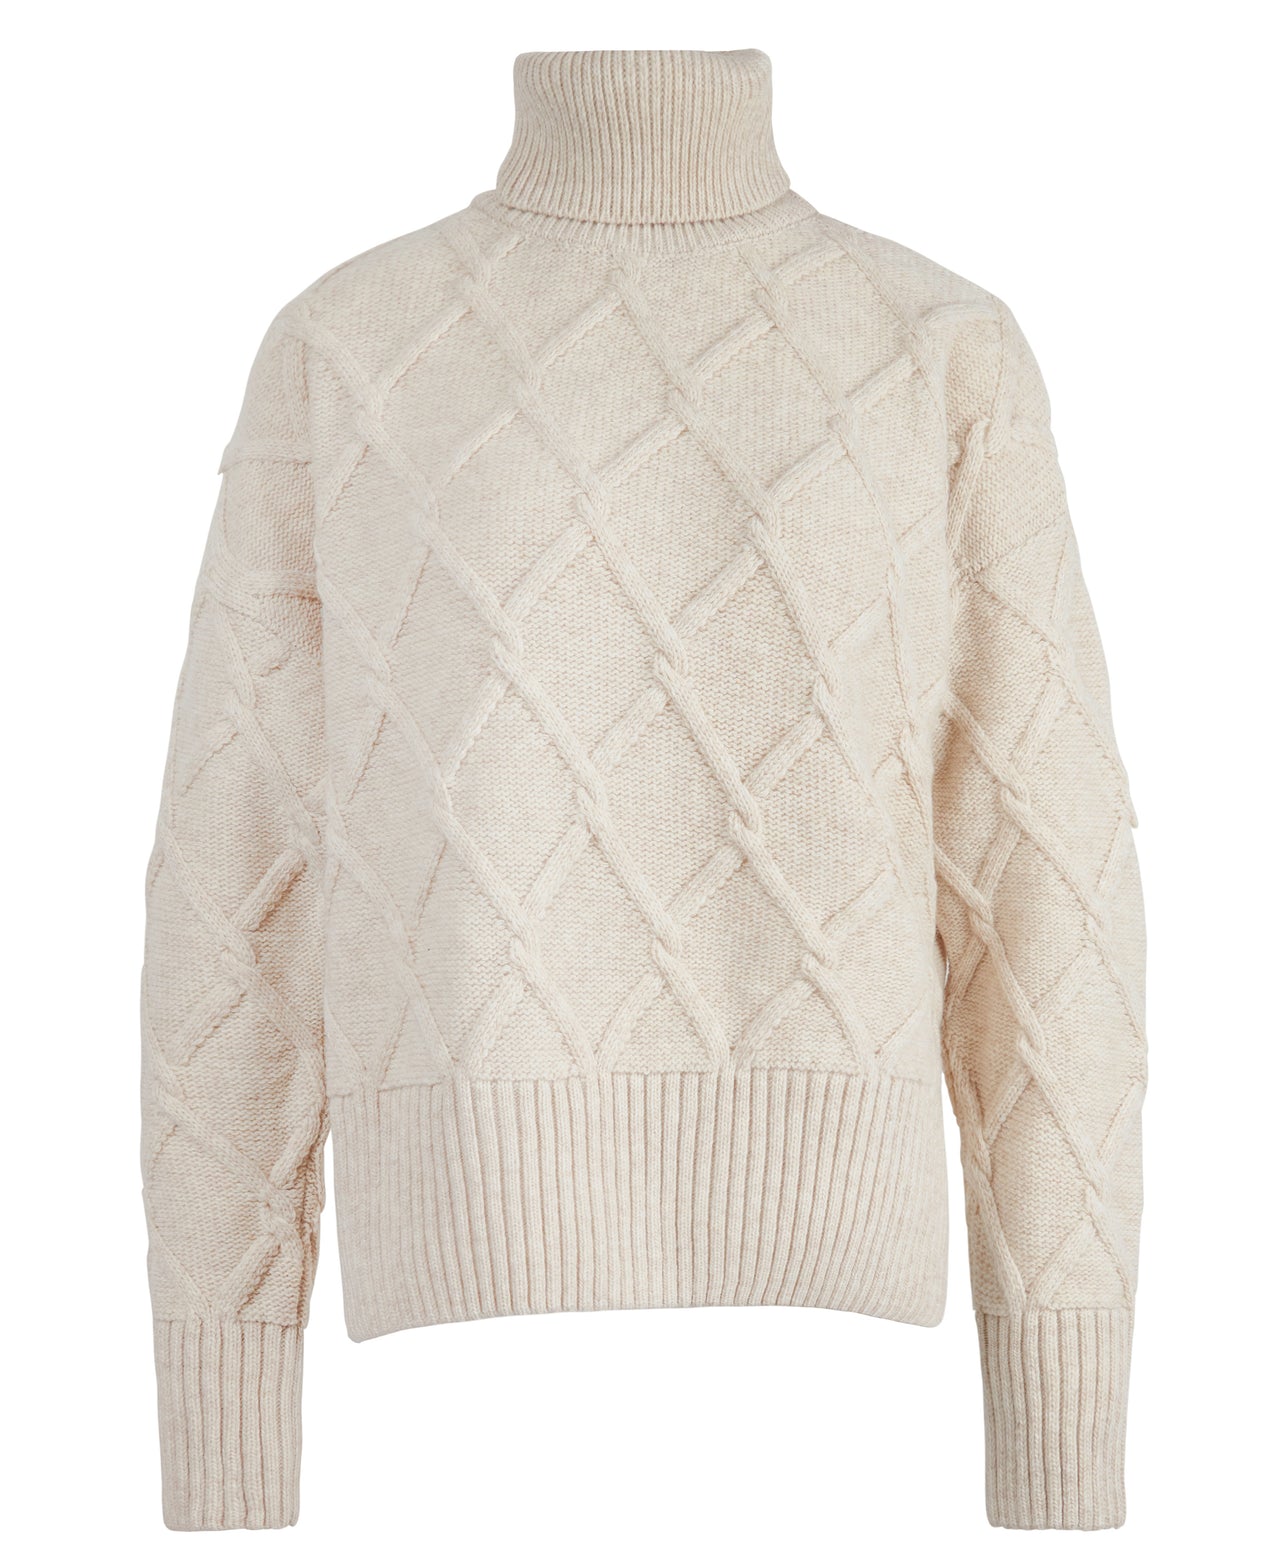 Barbour Perch Knitted Oatmeal Jumper